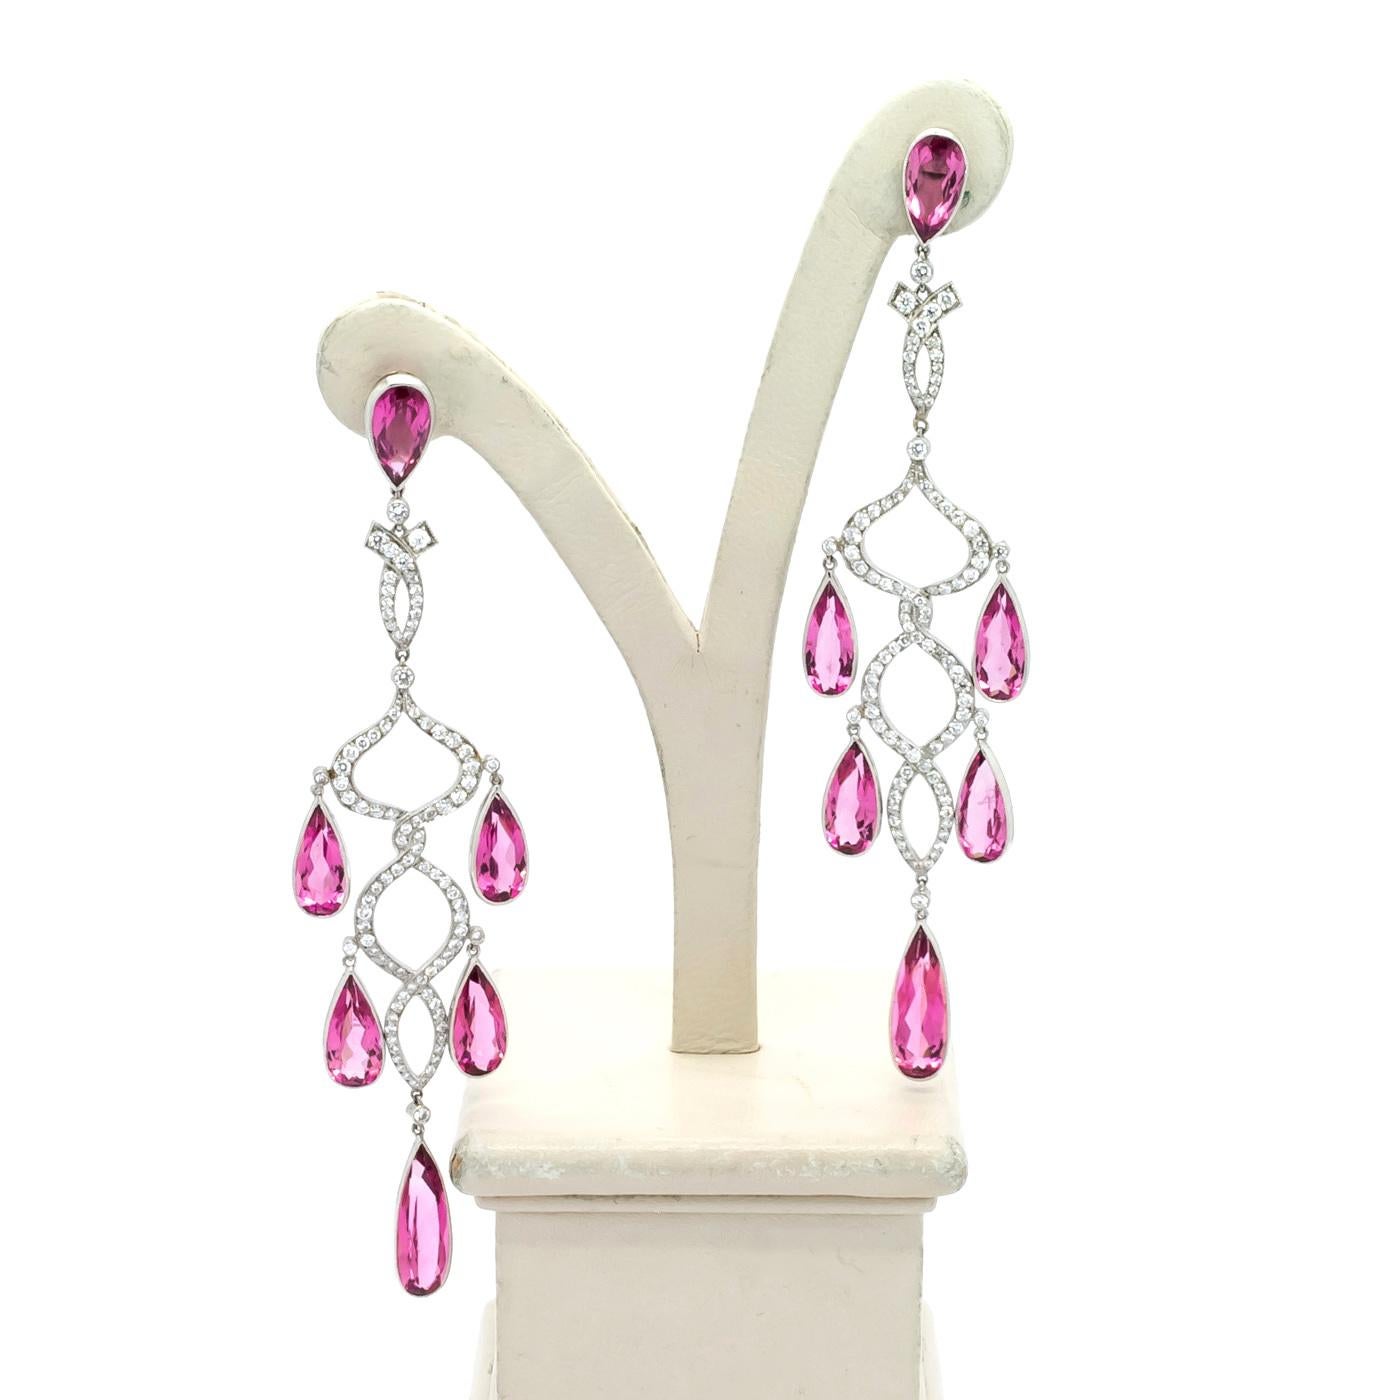 A pair of modern, morganite and diamond chandelier earrings, each earring compromising a pear-cut morganite suspending a diamond set drop in the form of two entwined ribbons and a further five pear-cut morganites, mounted in 18ct white gold,